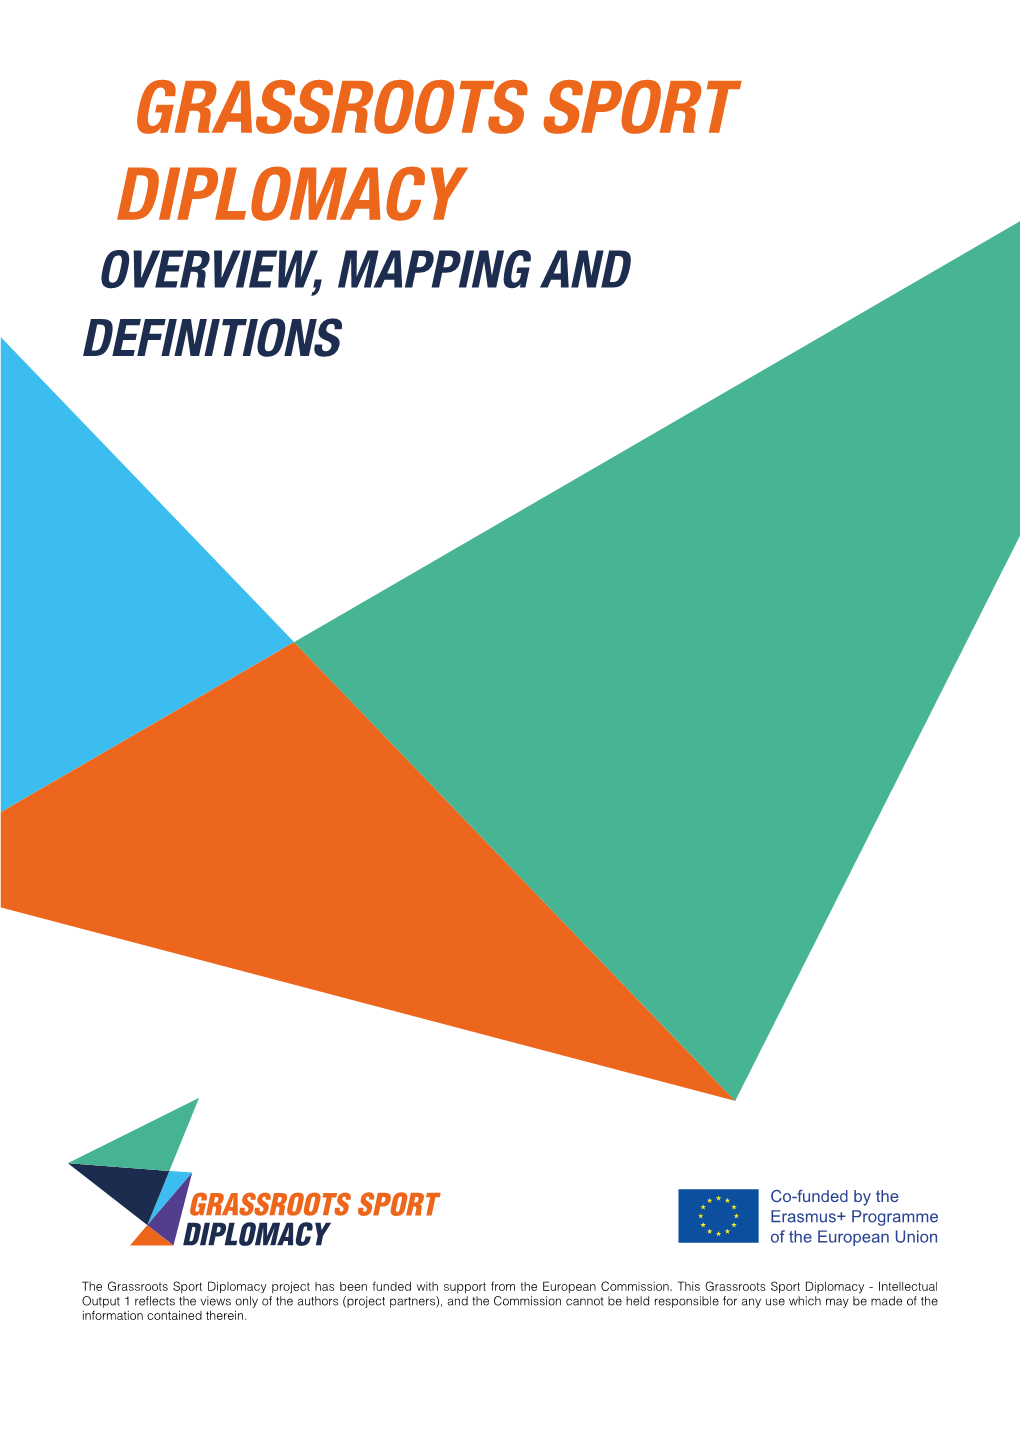 Grassroots Sport Diplomacy Overview, Mapping and Definitions